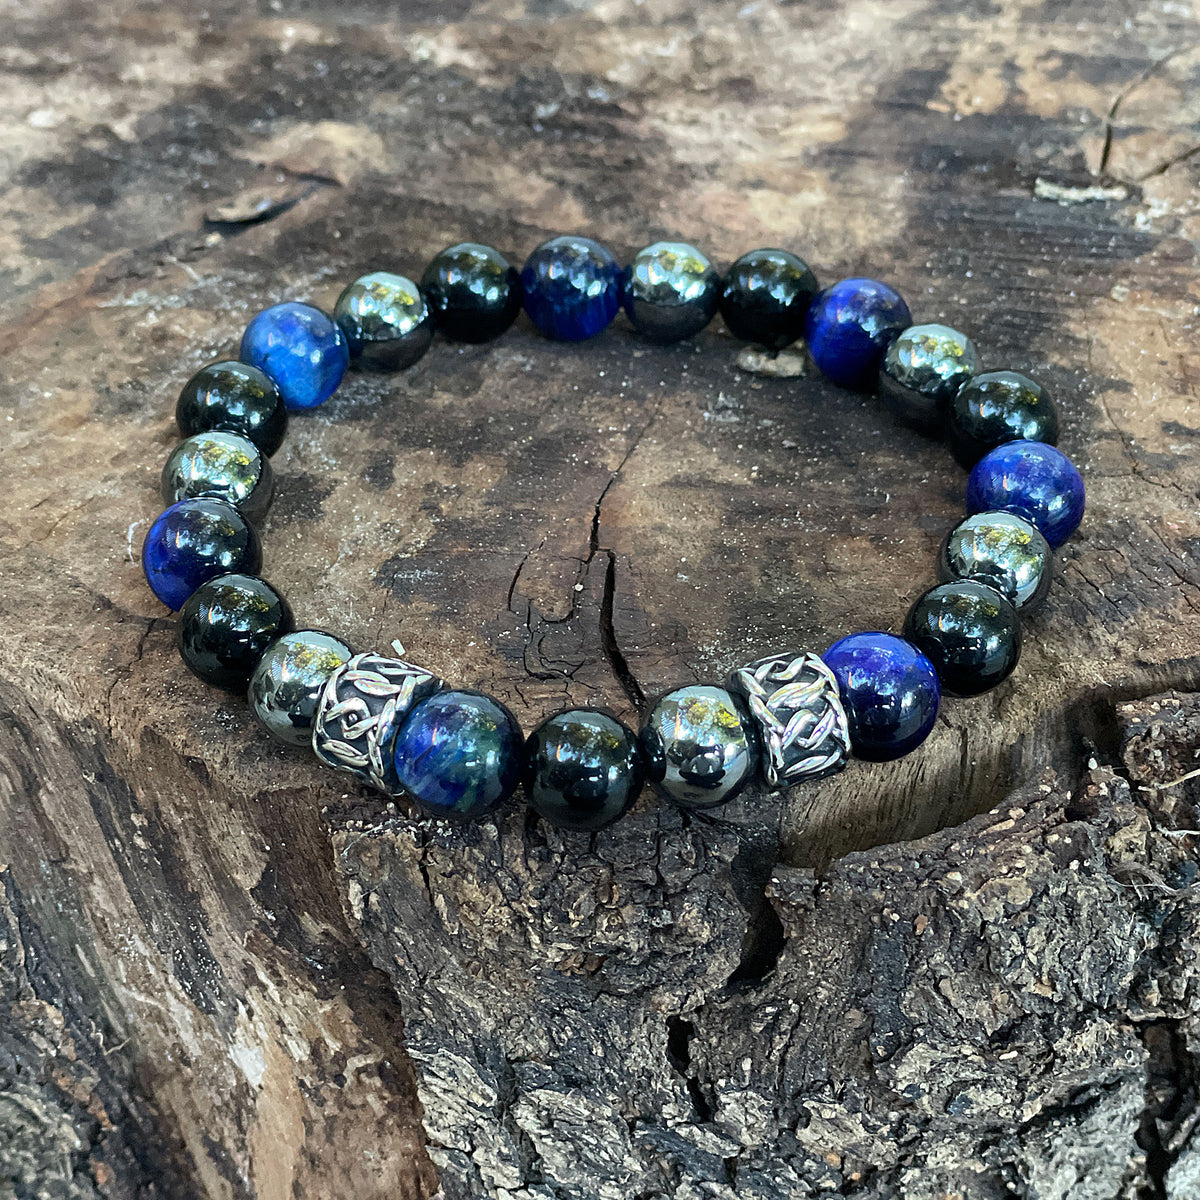 The Triple Protection bracelet 10mm - 3 of the most powerful crystals combined to create perfection. The Triple Protection Bracelet is one of our most sought after bracelets, boasting some of the most incredible gems around. Blue Tiger’s eye, black Obsidian and Hematite is the powerhouse of beads when combined into one.